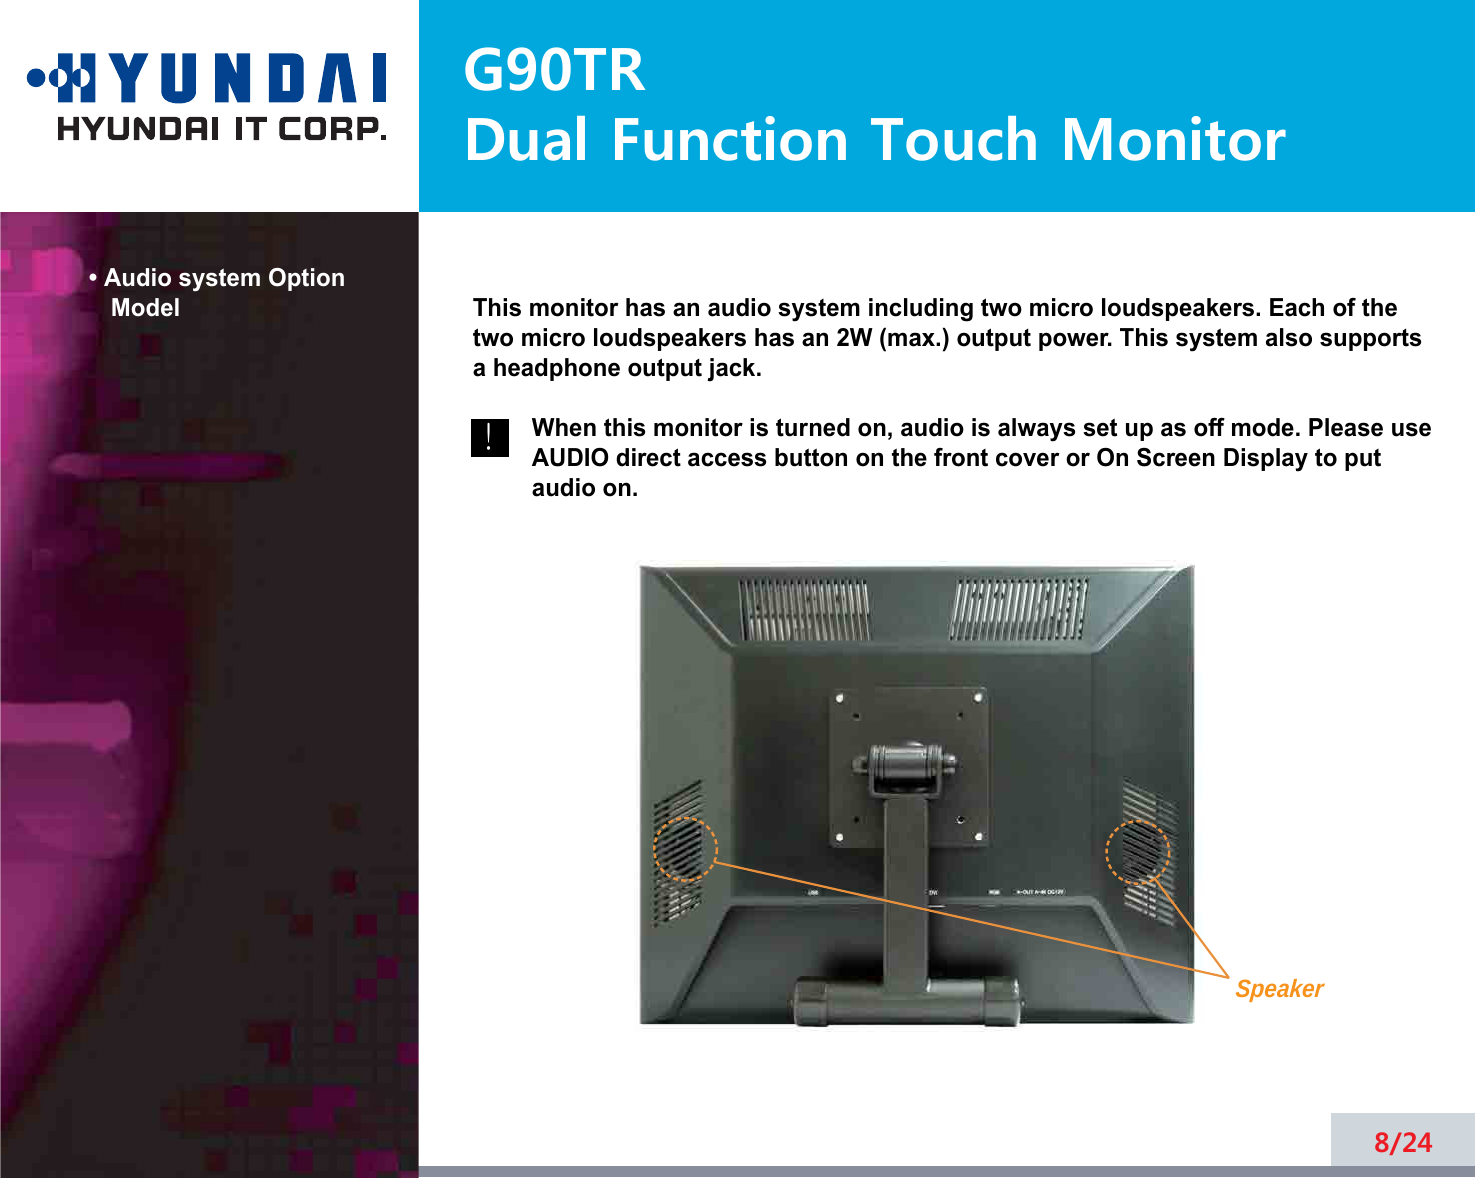 G90TRDual Function Touch Monitor• Audio system OptionModel8/24!!This monitor has an audio system including two micro loudspeakers. Each of thetwo micro loudspeakers has an 2W (max.) output power. This system also supportsa headphone output jack.When this monitor is turned on, audio is always set up as off mode. Please useAUDIO direct access button on the front cover or On Screen Display to putaudio on. Speaker